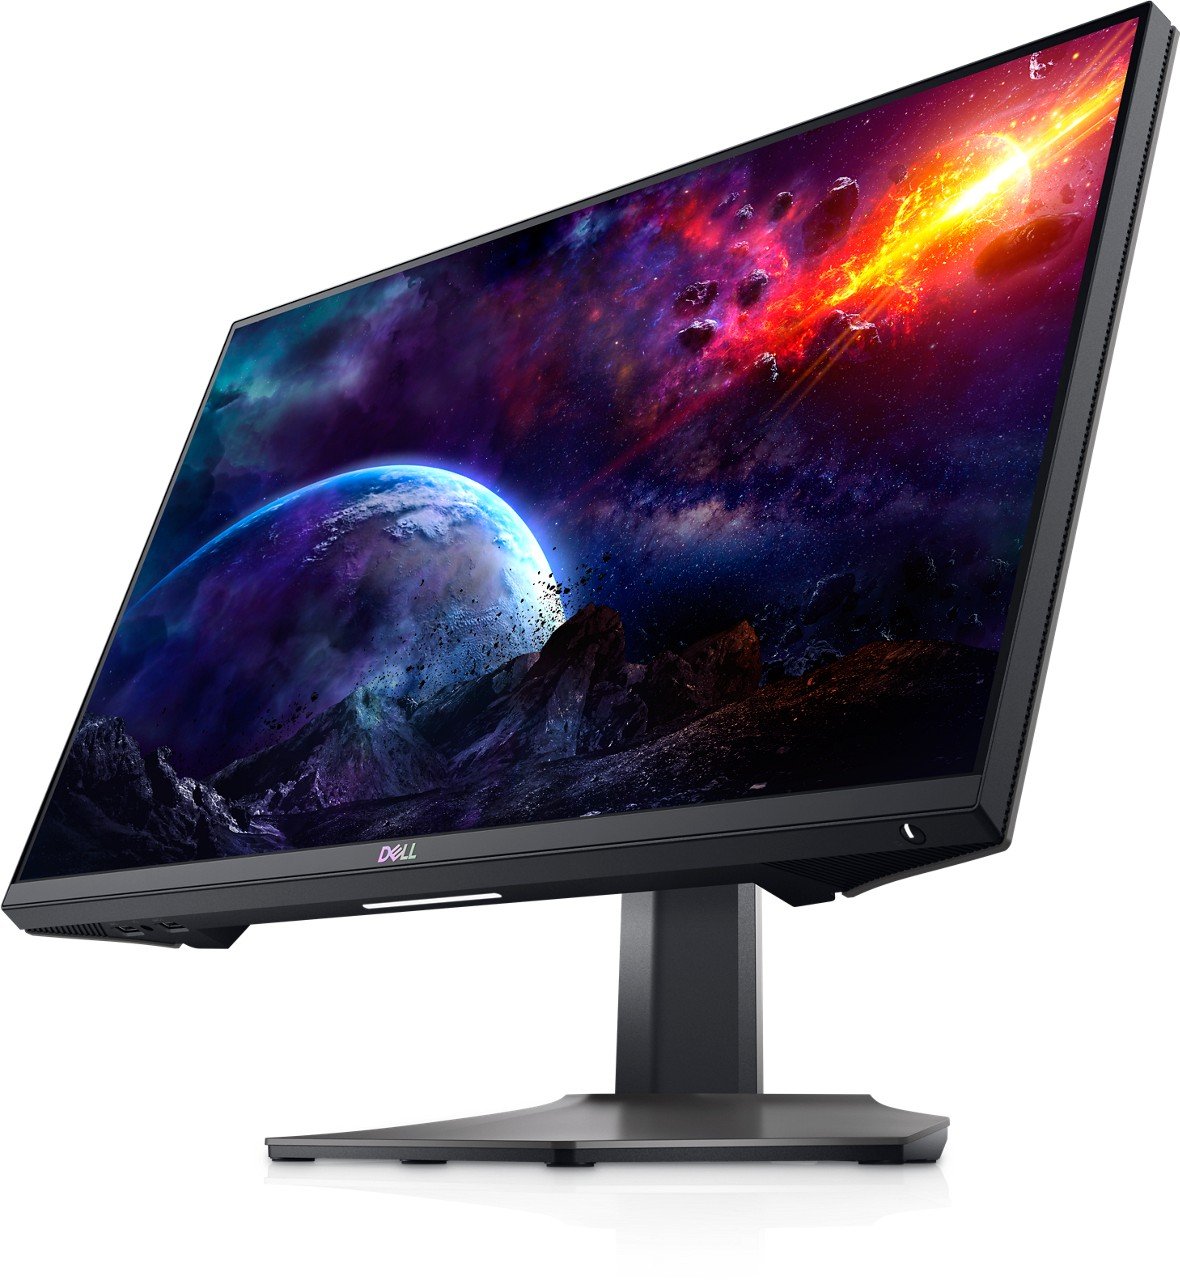 Dell S25 Monitor Front View